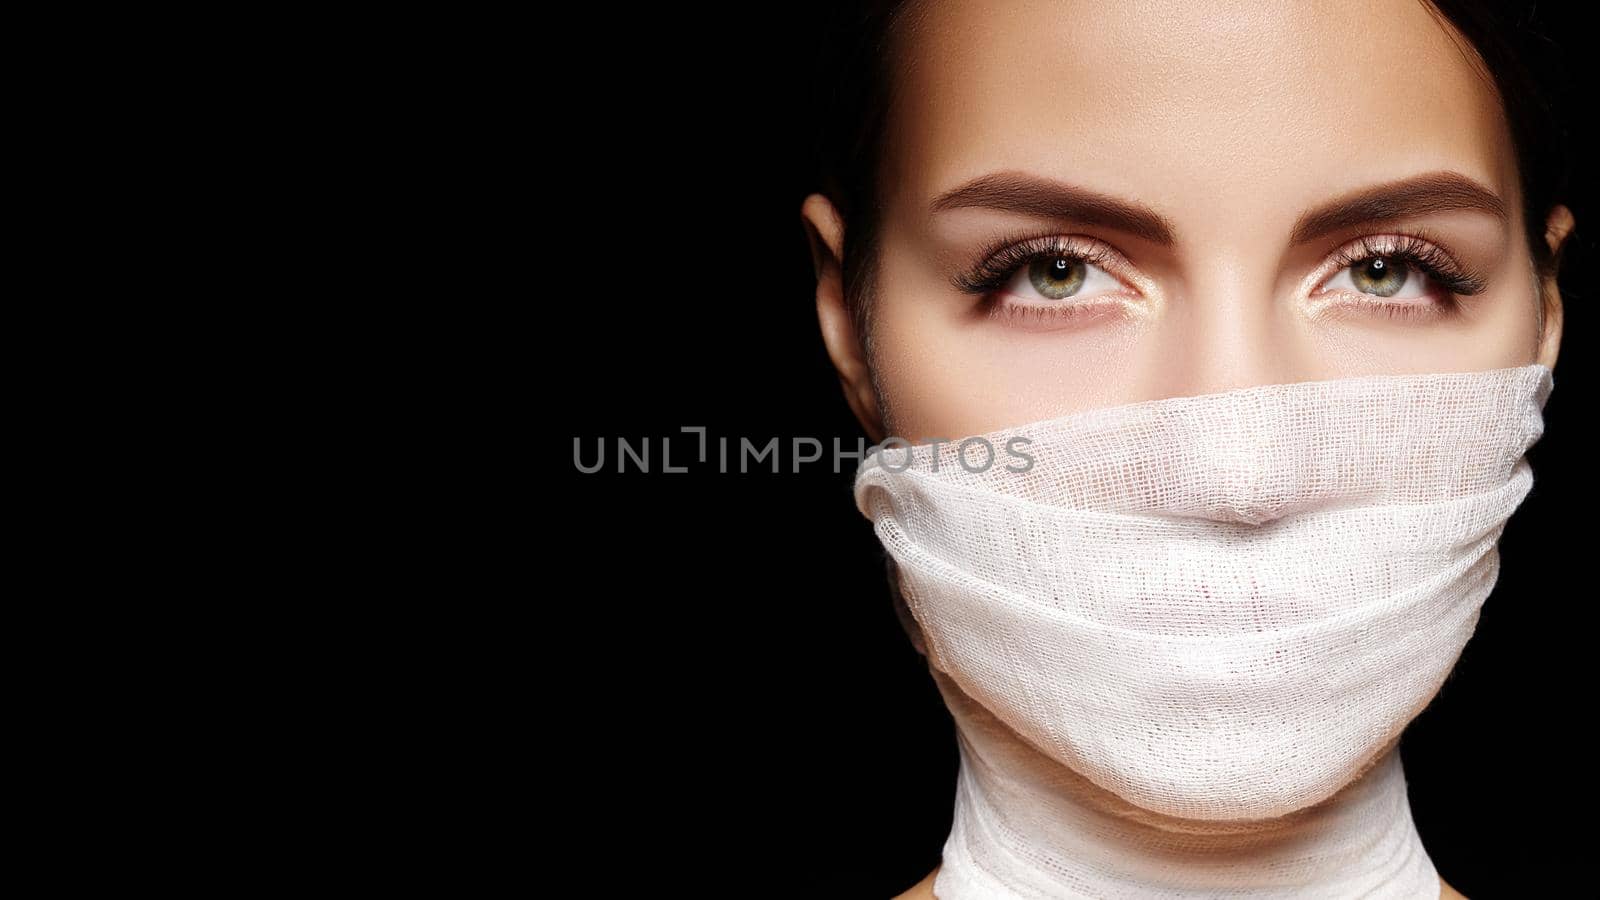 Beautiful woman with bandage mask on face. Fashion eye make-up. Beauty surgery or protection hygiene in virus pandemic by MarinaFrost